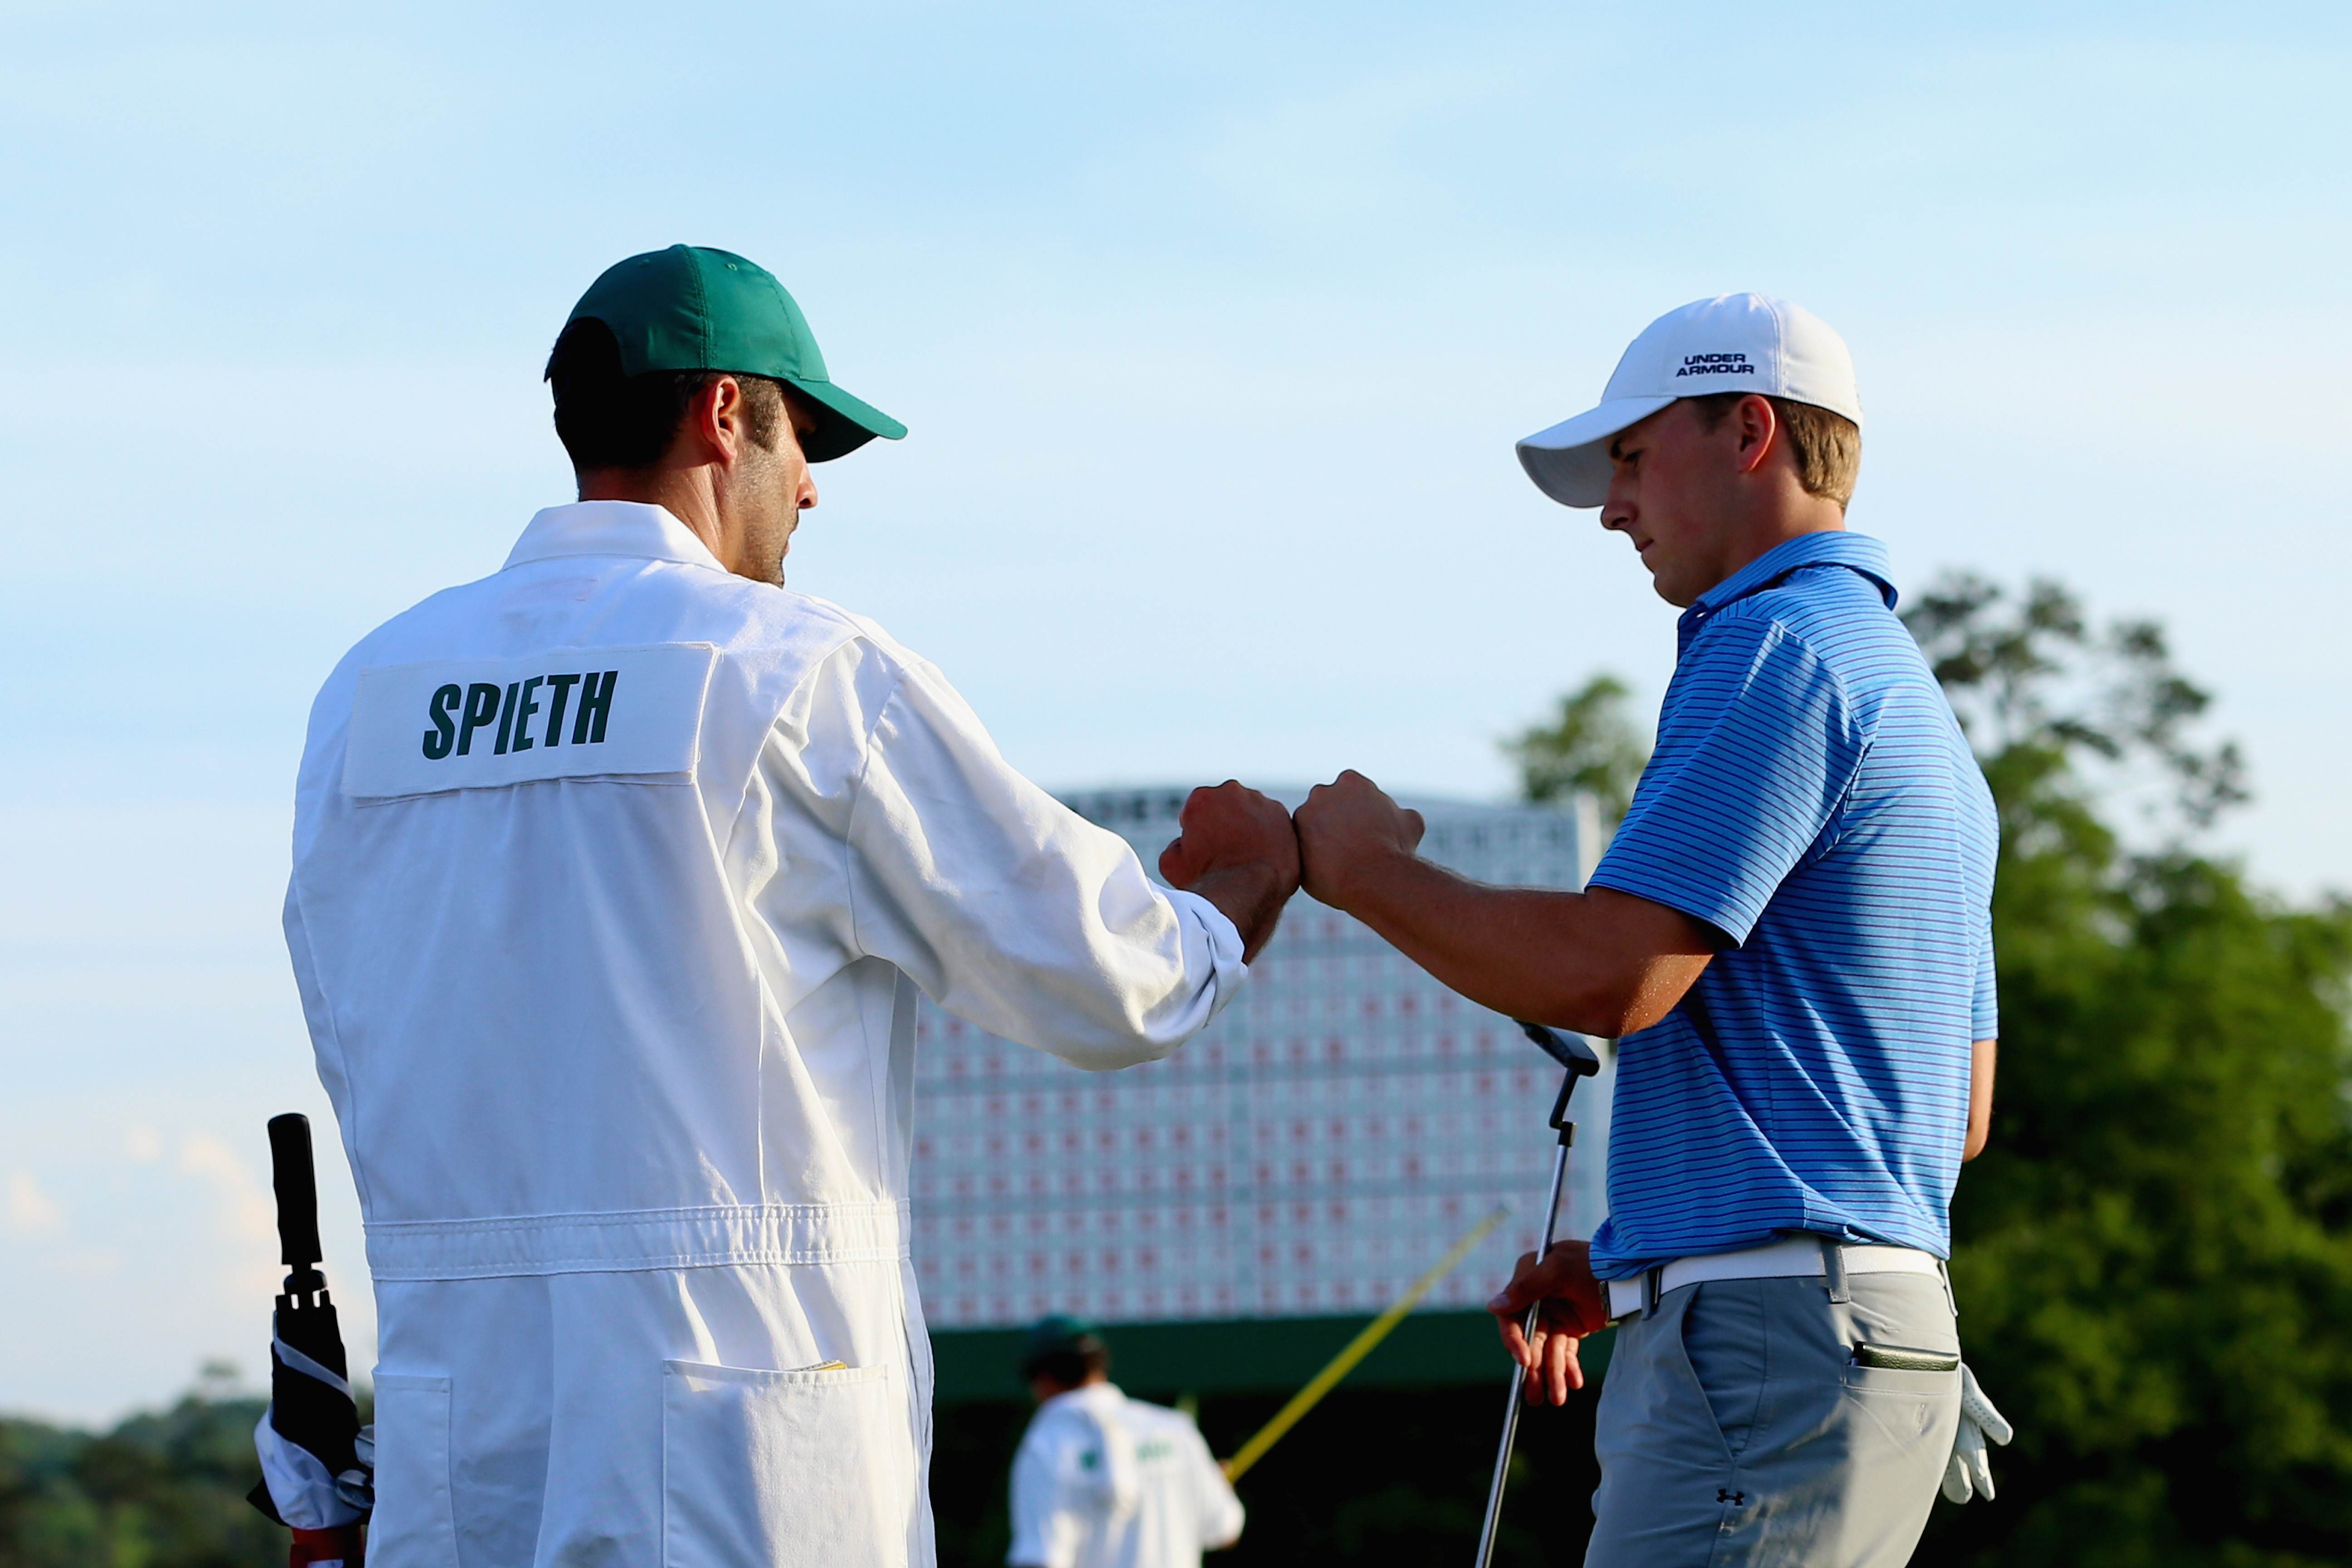 Jordan Spieth and his caddy bump fists after holing out on 18. Photo: AFP